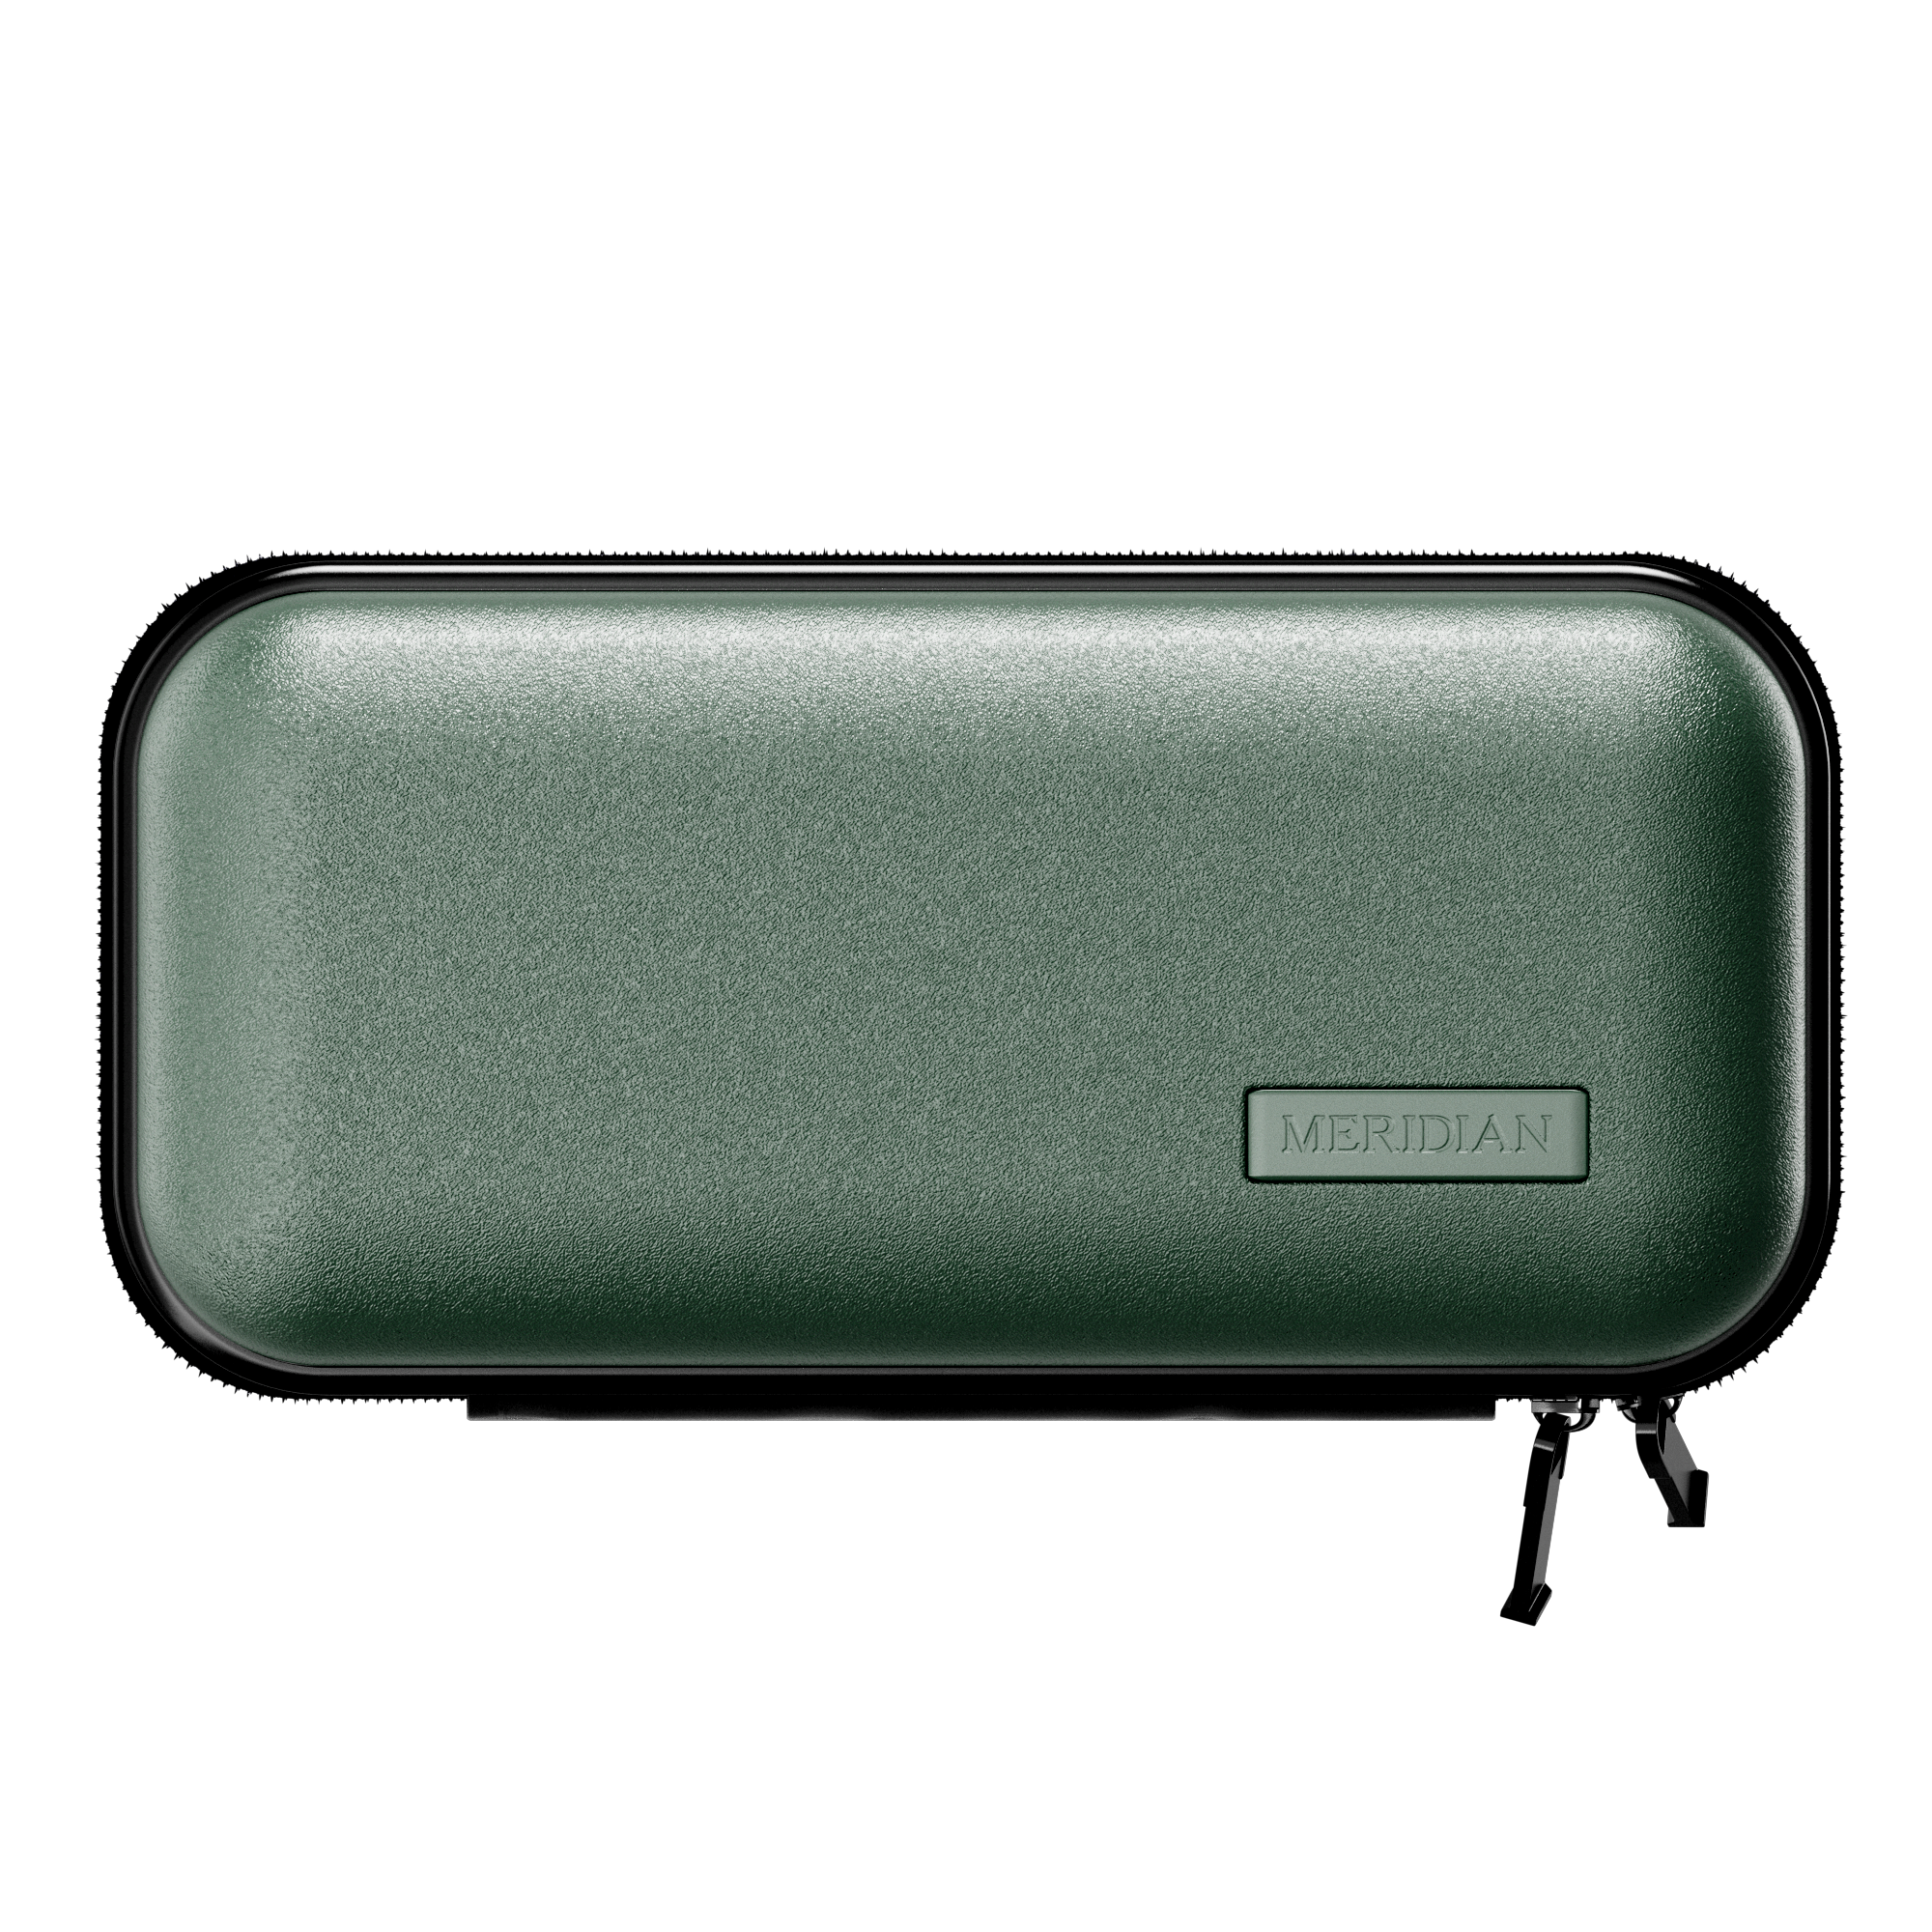 Travel case front view 